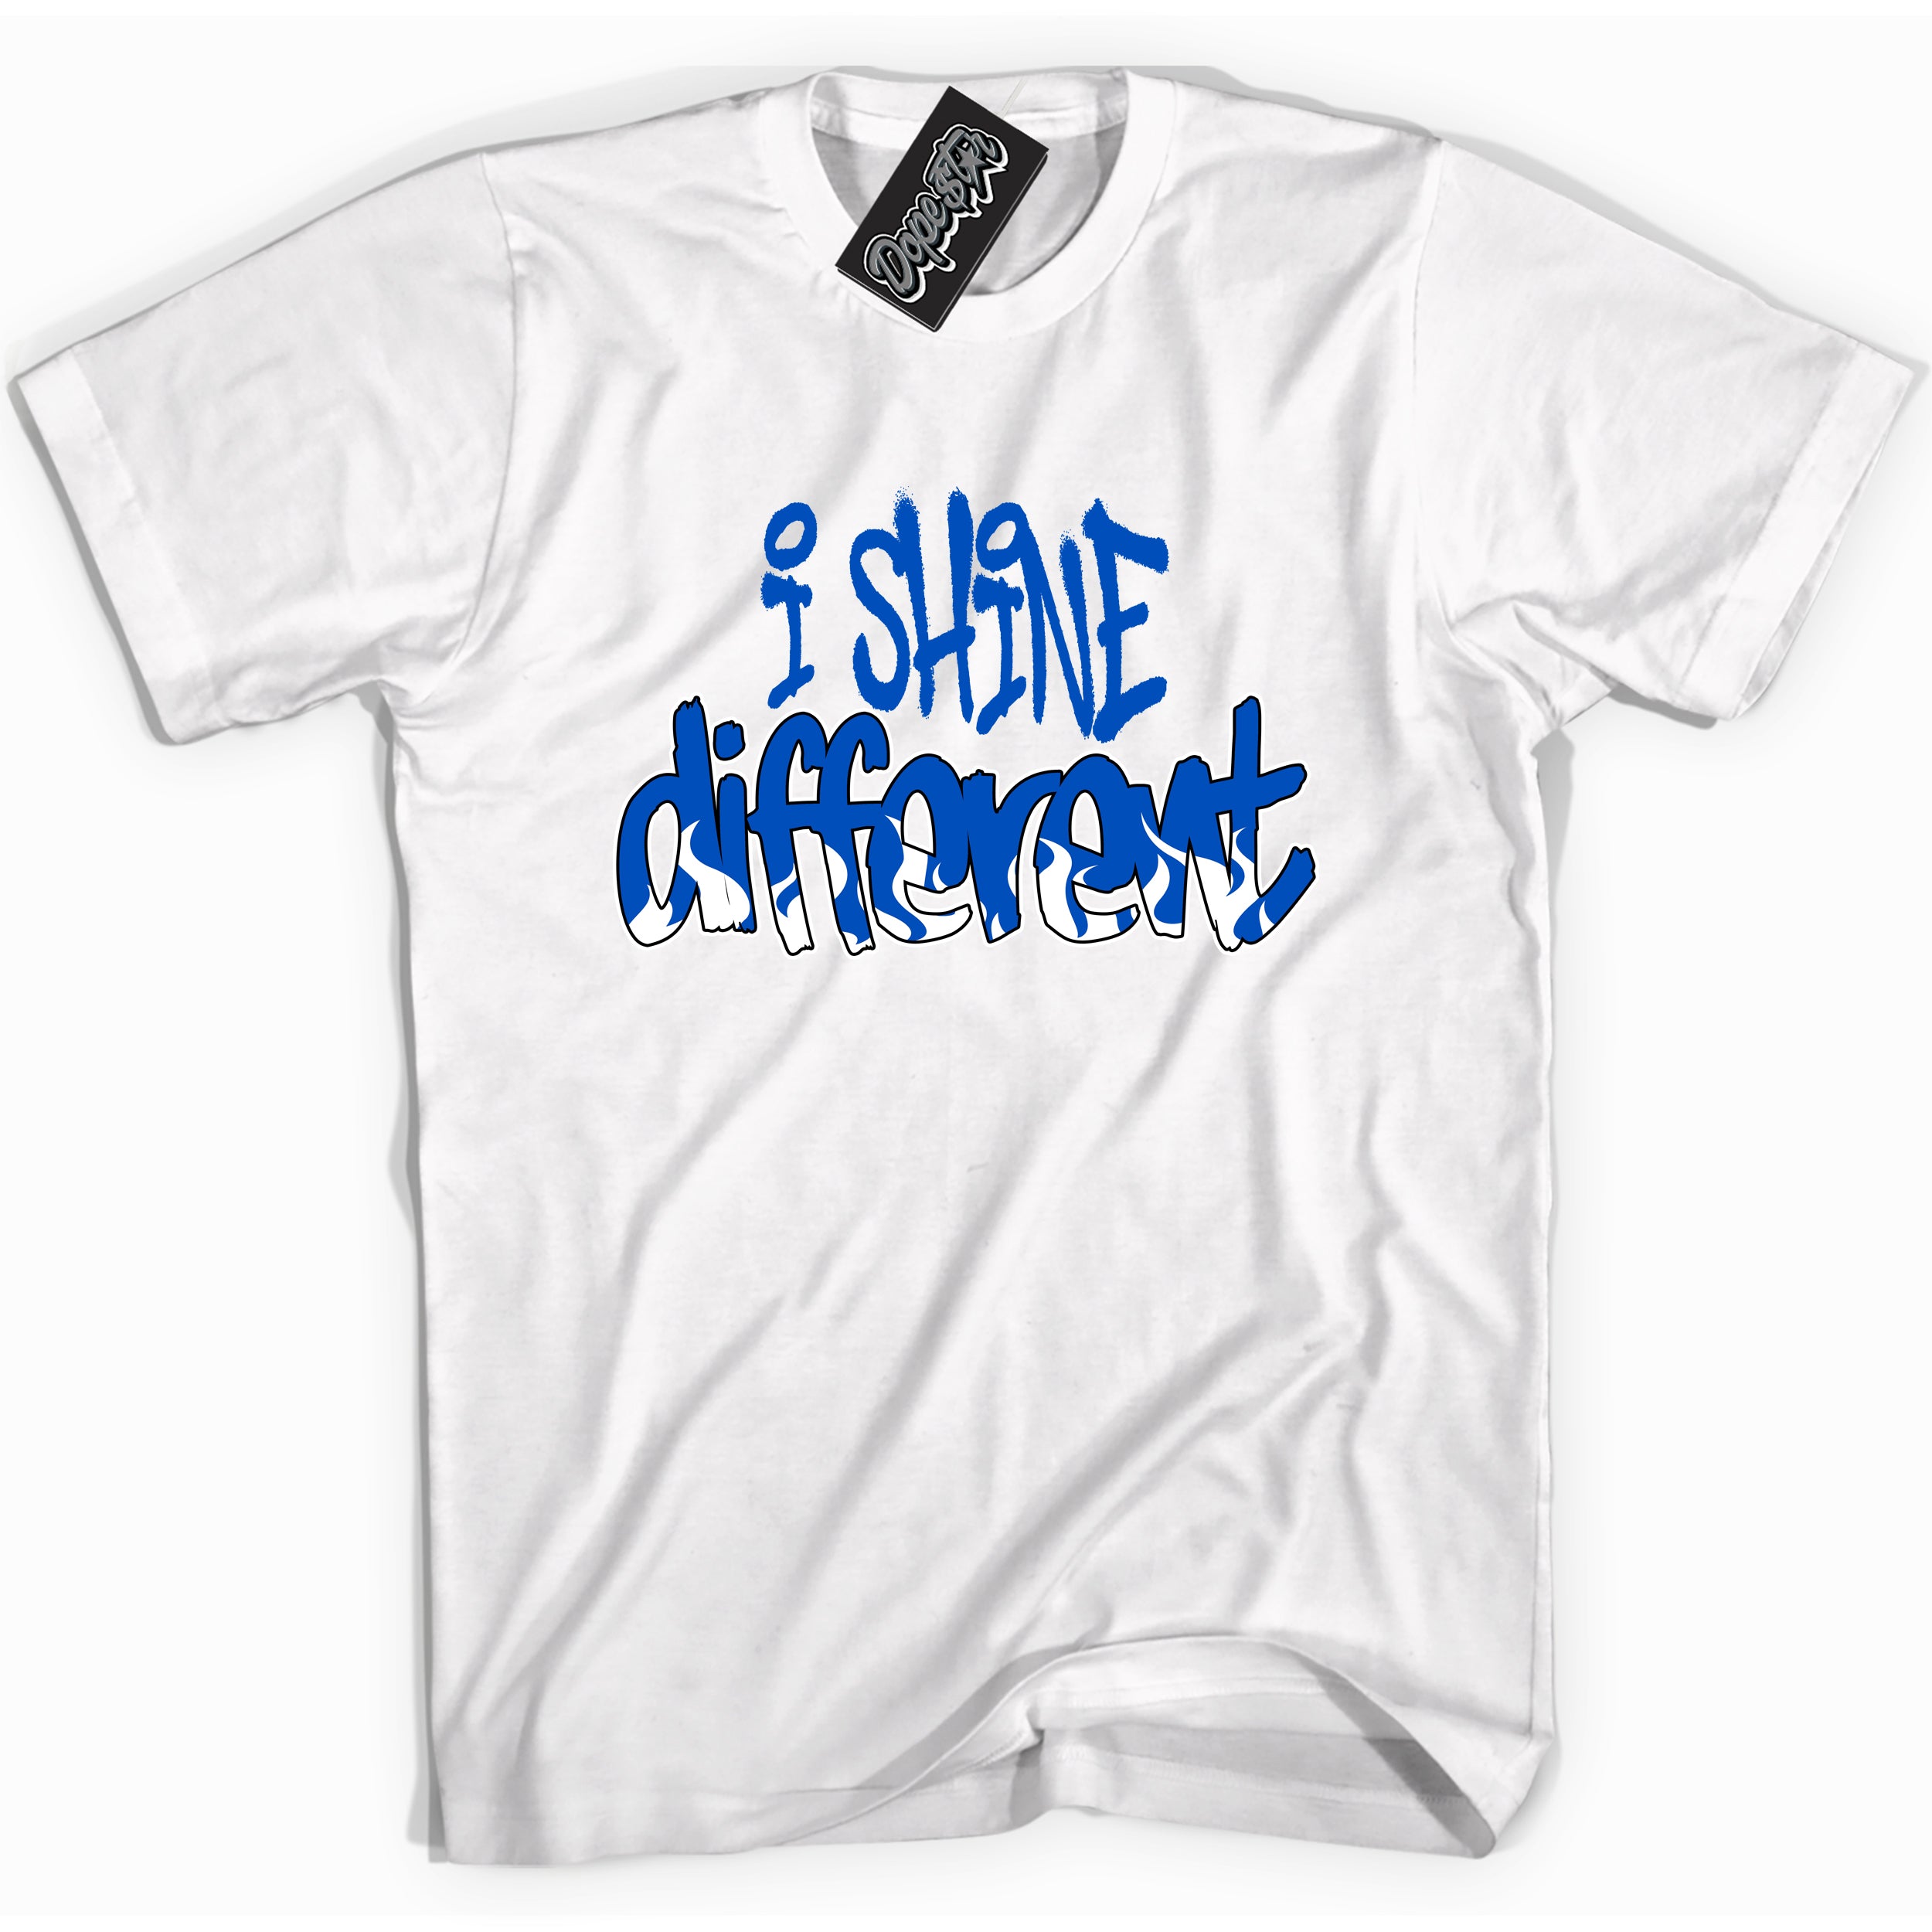 Cool White graphic tee with I Shine Different print, that perfectly matches OG Royal Reimagined 1s sneakers 